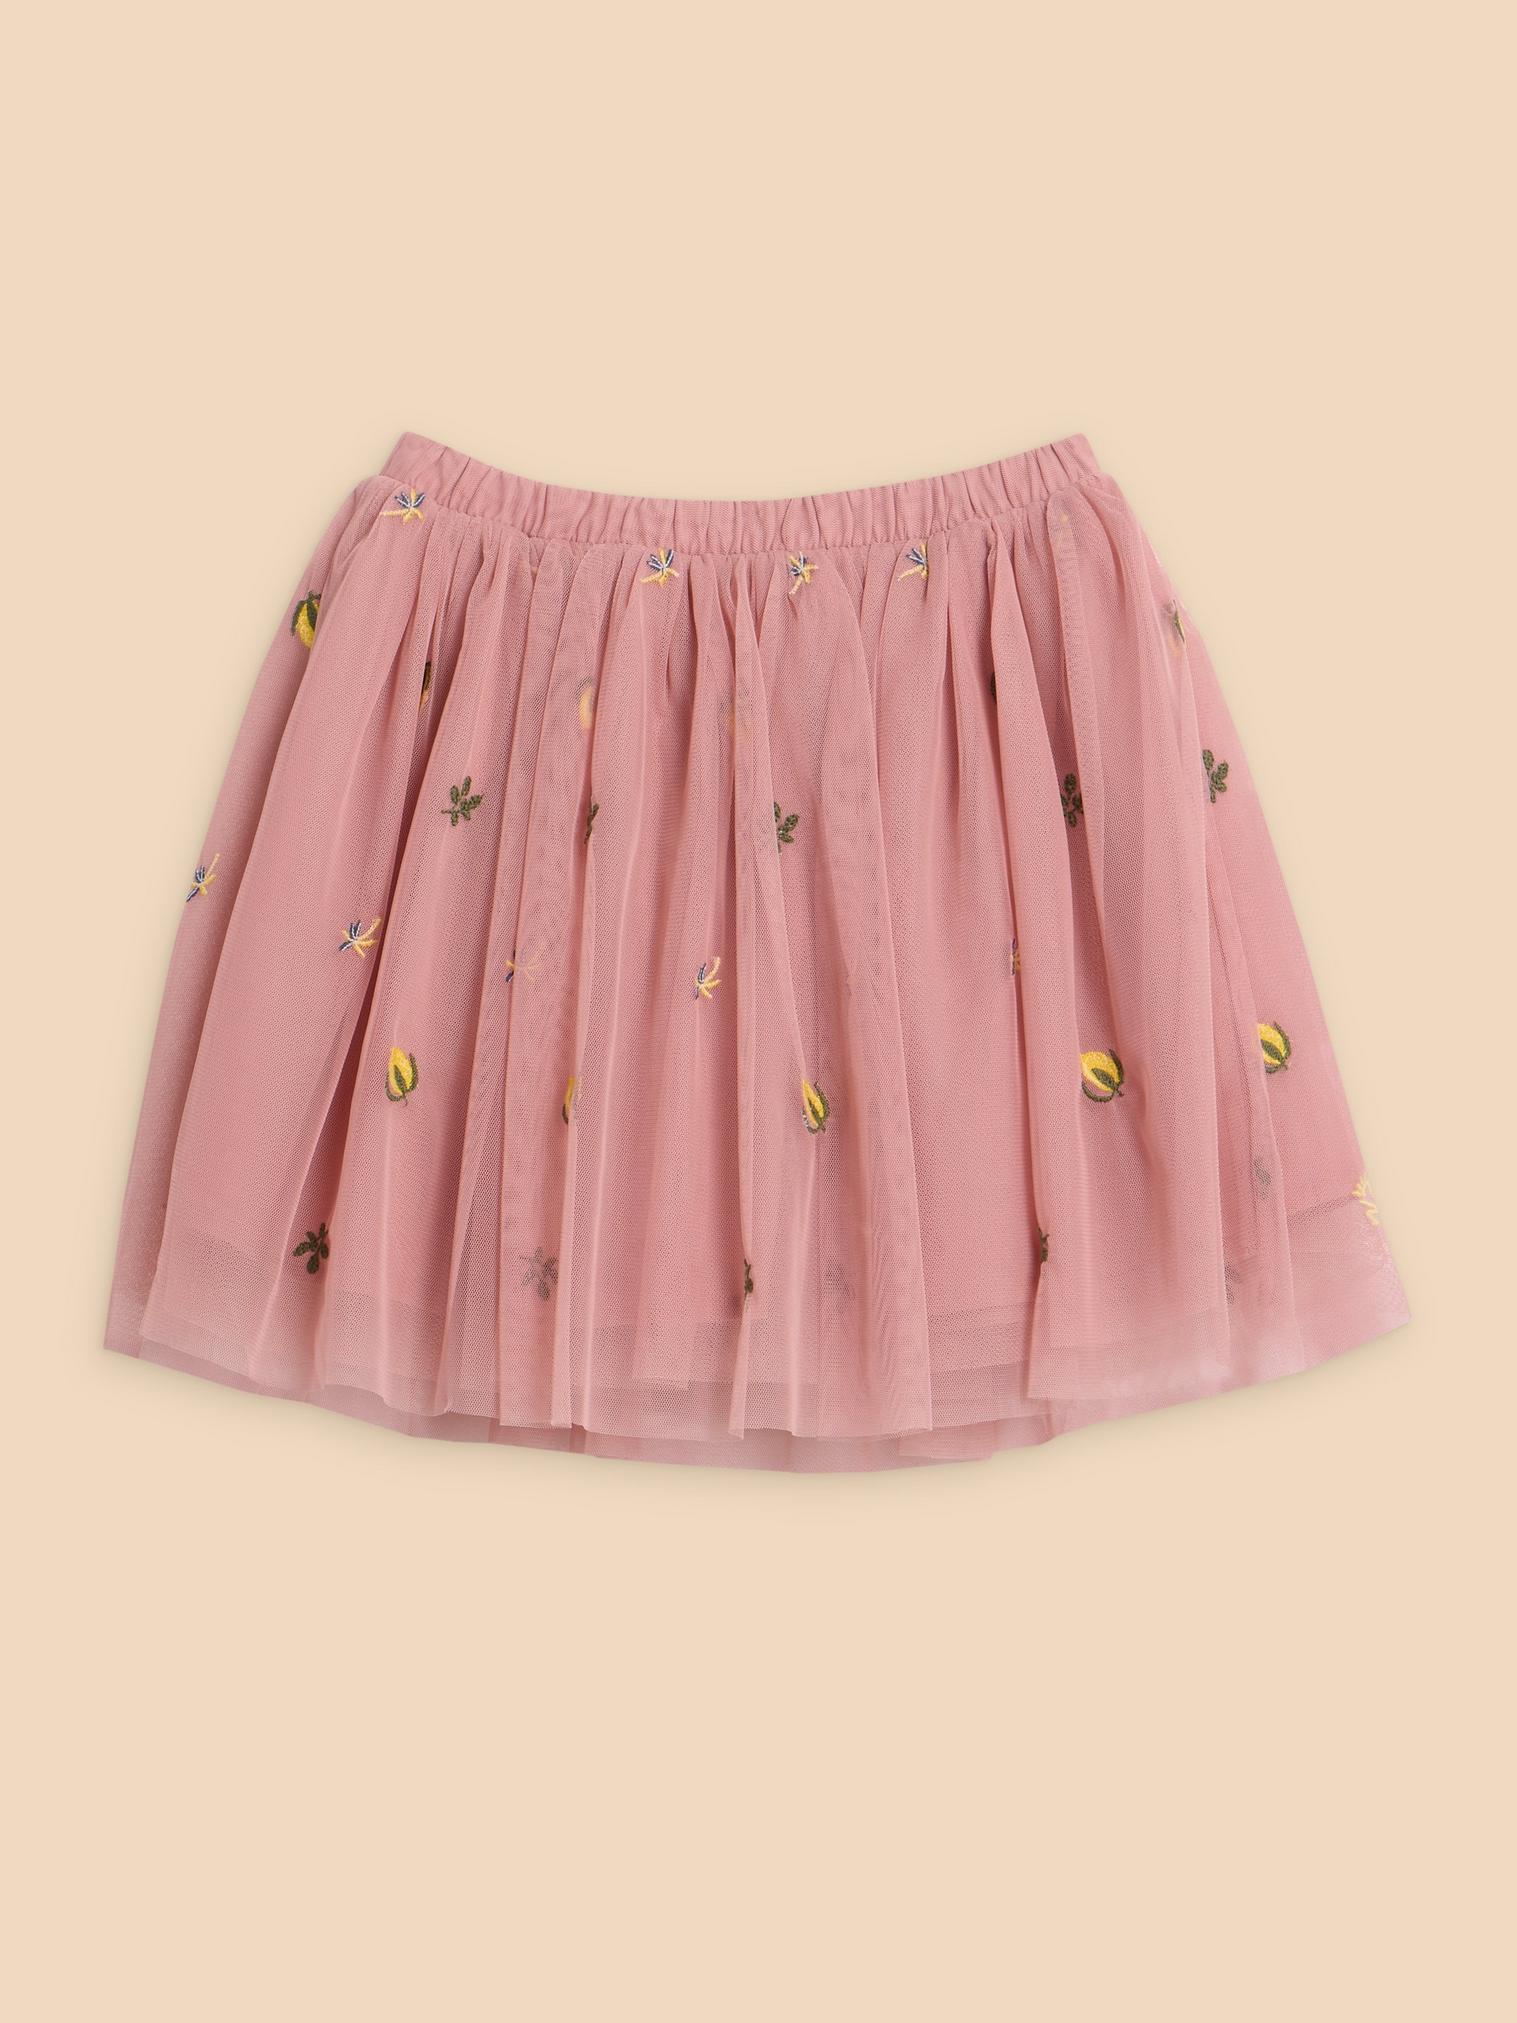 Embroidered Tuelle Skirt in LGT PINK - FLAT FRONT